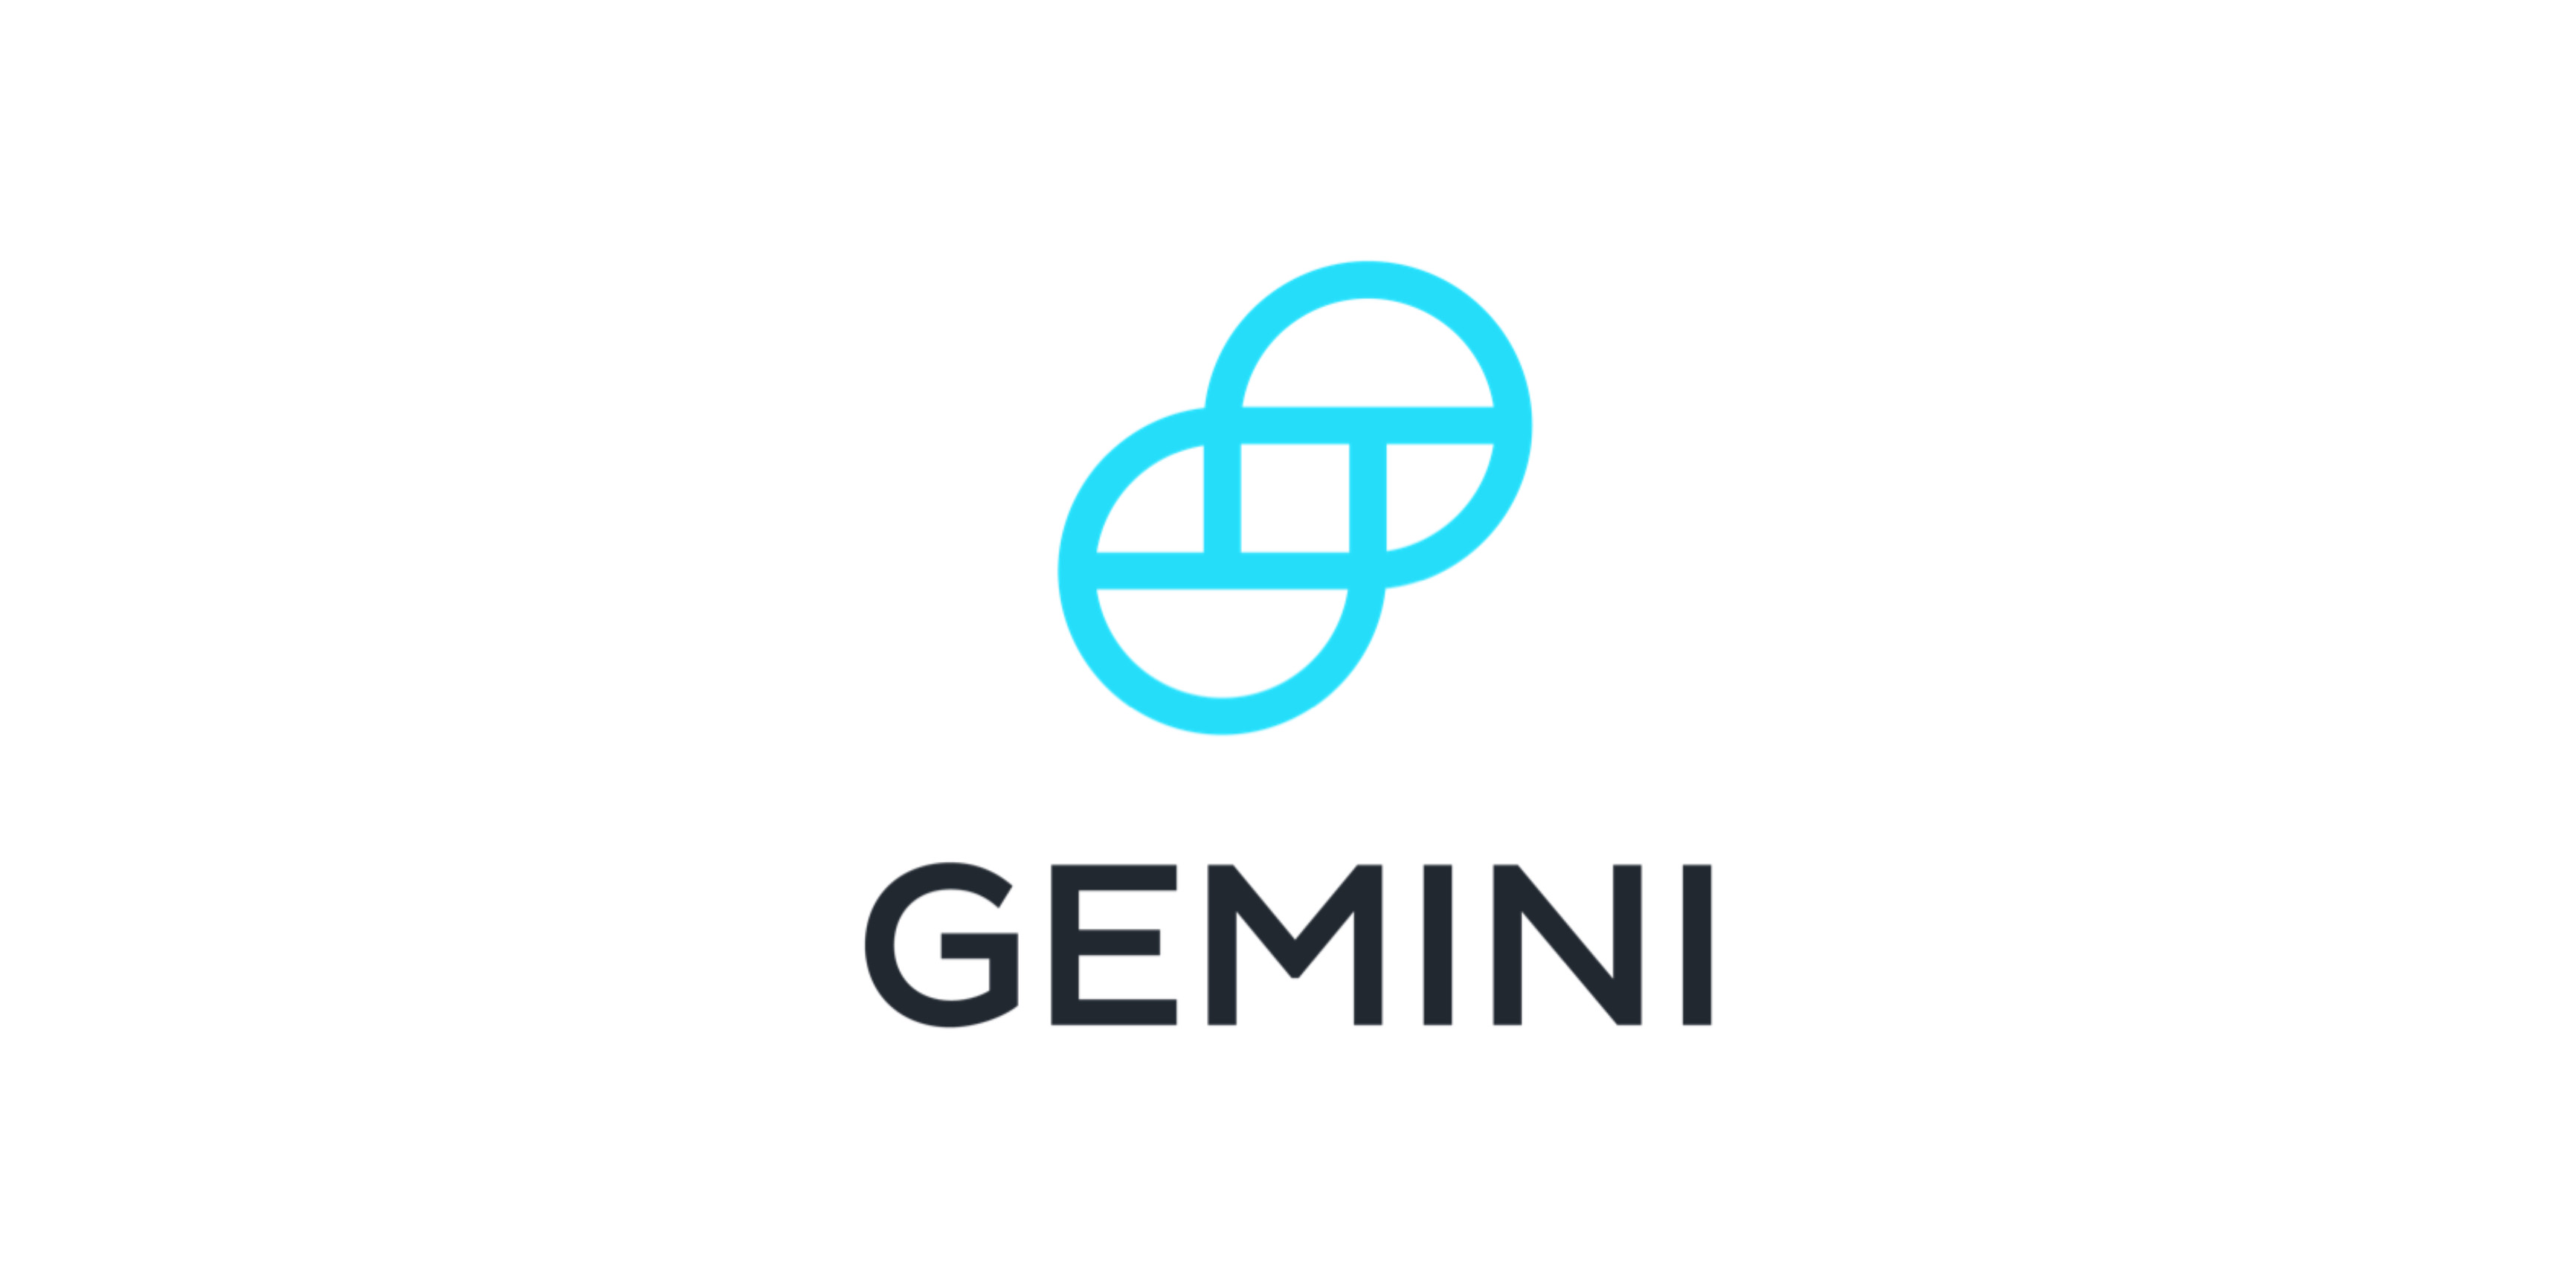 Gemini Selects ComplyAdvantage For The Company’s Award-Winning Hyperscale FinancialRisk Data & AML Solution